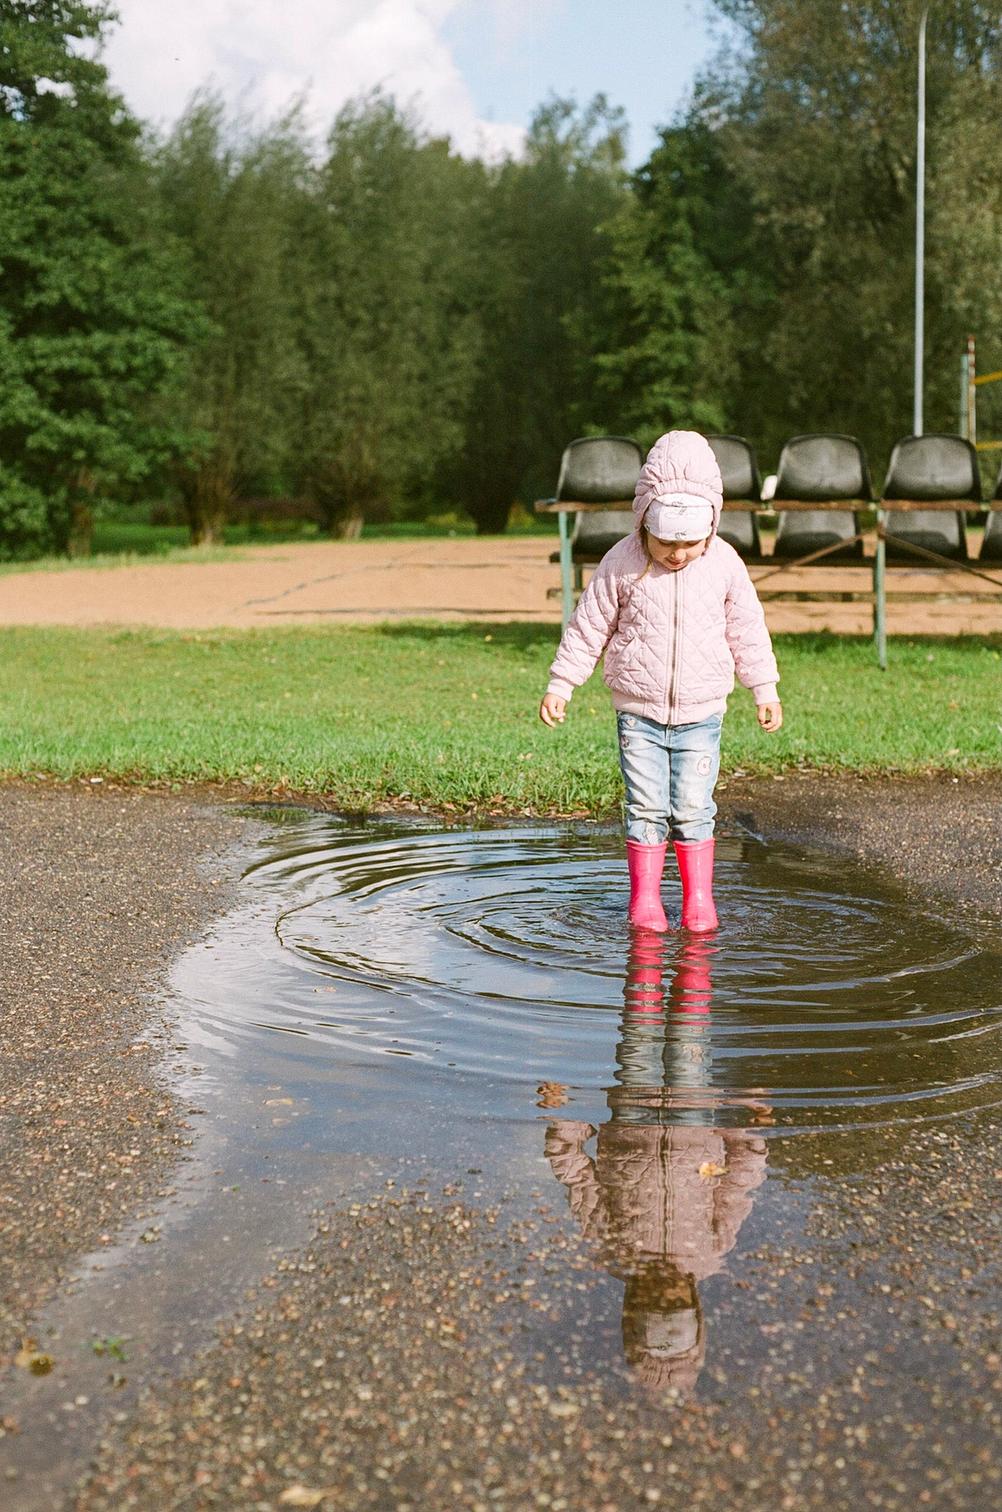 Picture of my daughter standing in rain water with a full sized reflection of her seen in said rainwater.